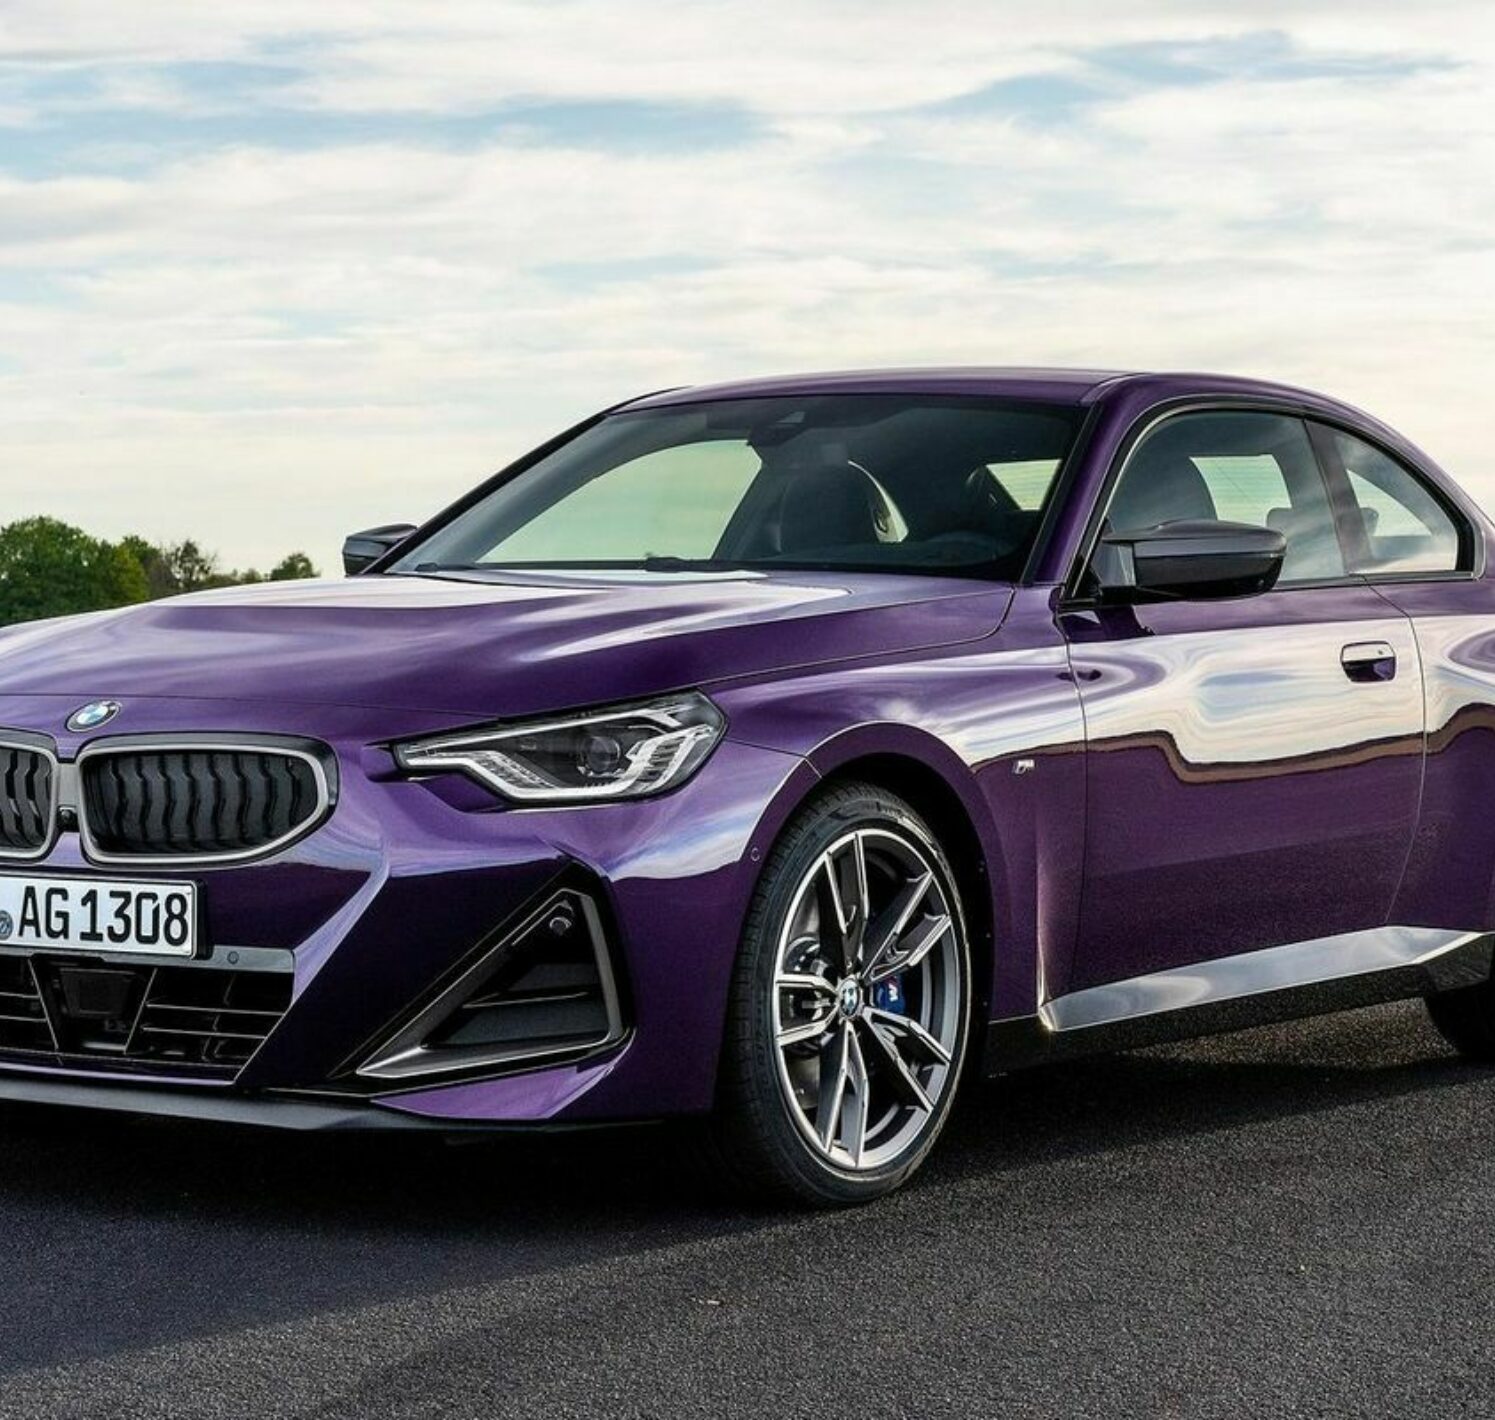 https://autofilter.sk/assets/images/rad-2-coupe/gallery/bmw-m240i-xdrive-coupe-2021_17-galeria.jpg - obrazok